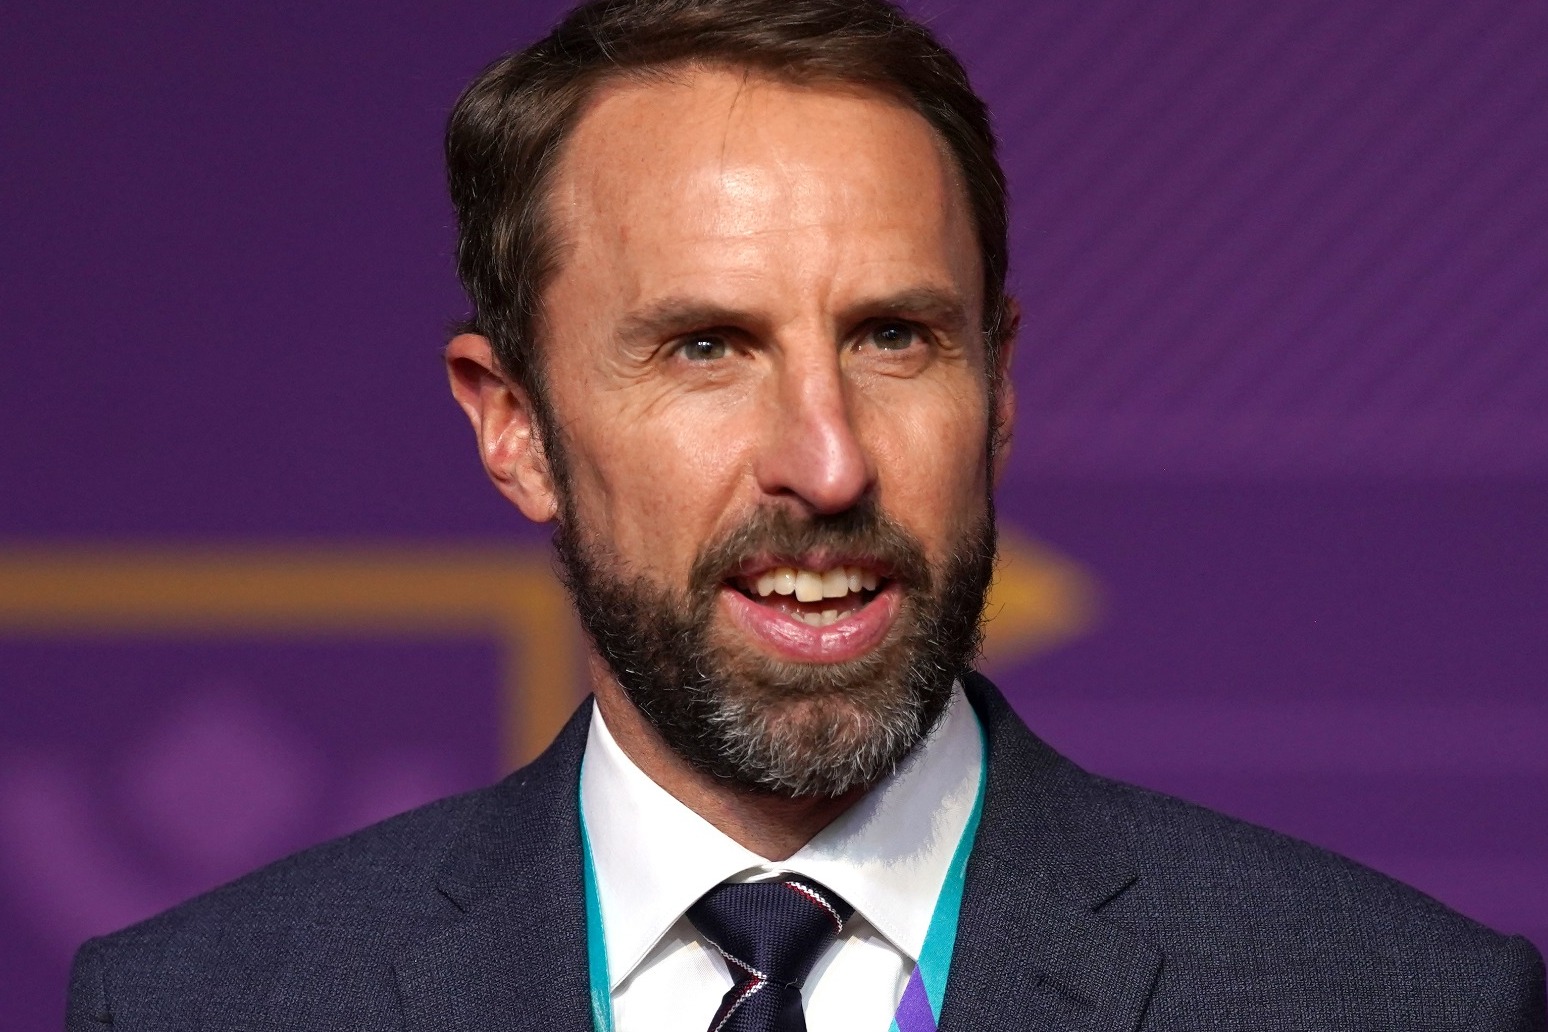 Gareth Southgate expects tricky World Cup ties despite favourable England draw